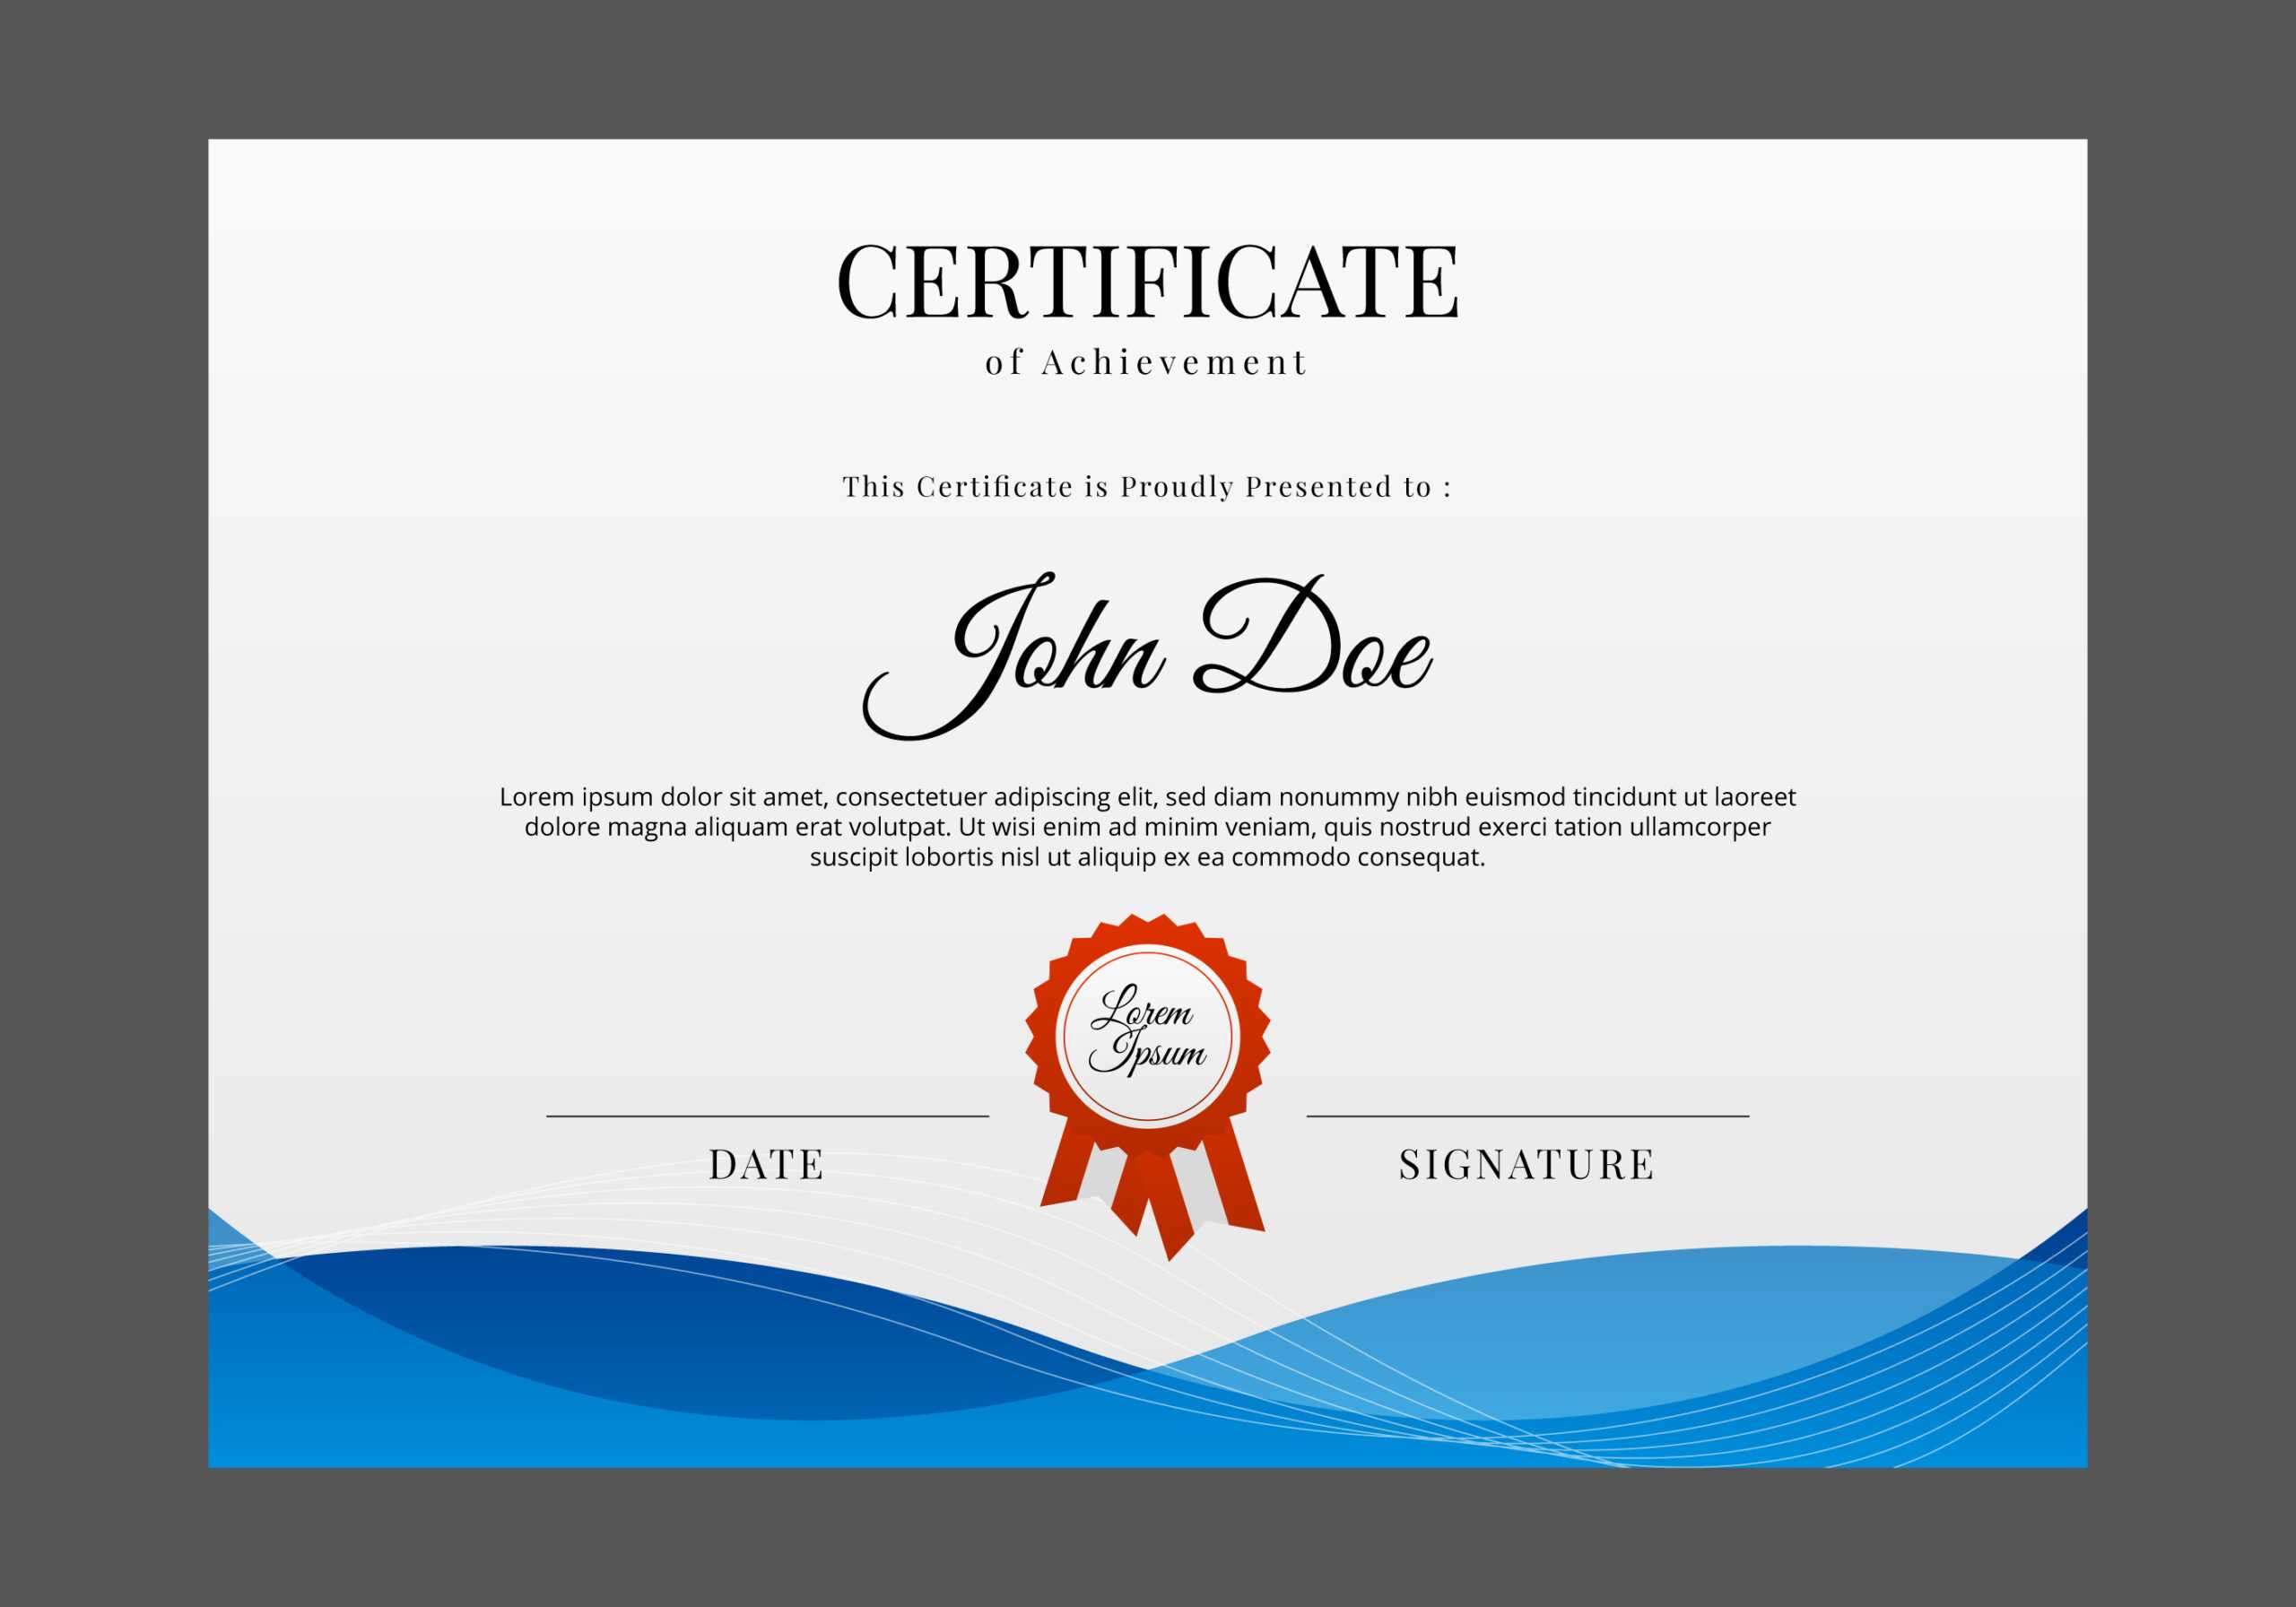 Certificate Templates, Free Certificate Designs Within Beautiful Certificate Templates